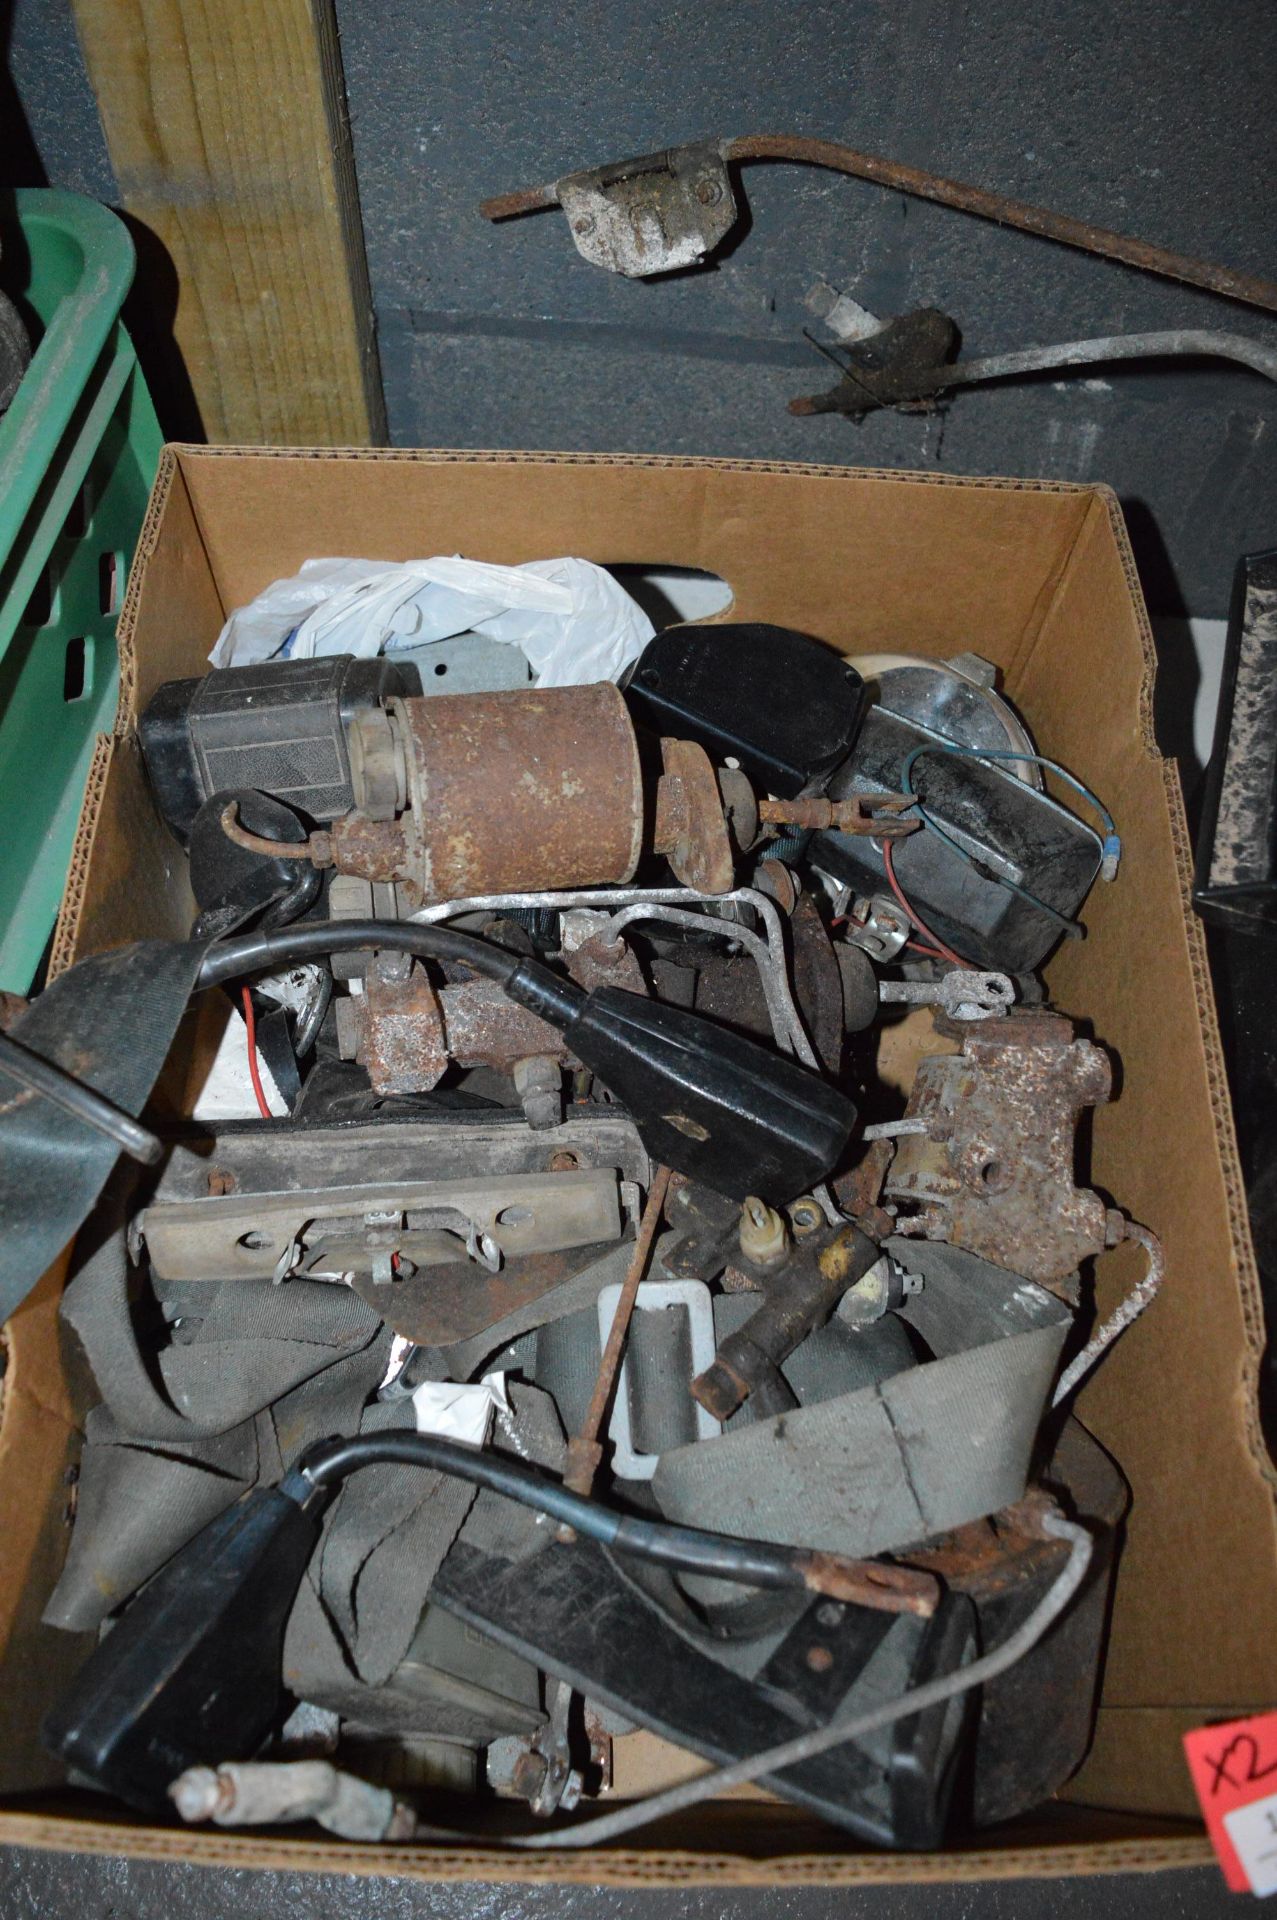 Two Boxes Containing Brake Cylinders, Mini Reservoirs, and a Mini Wiper Motor - Image 2 of 3